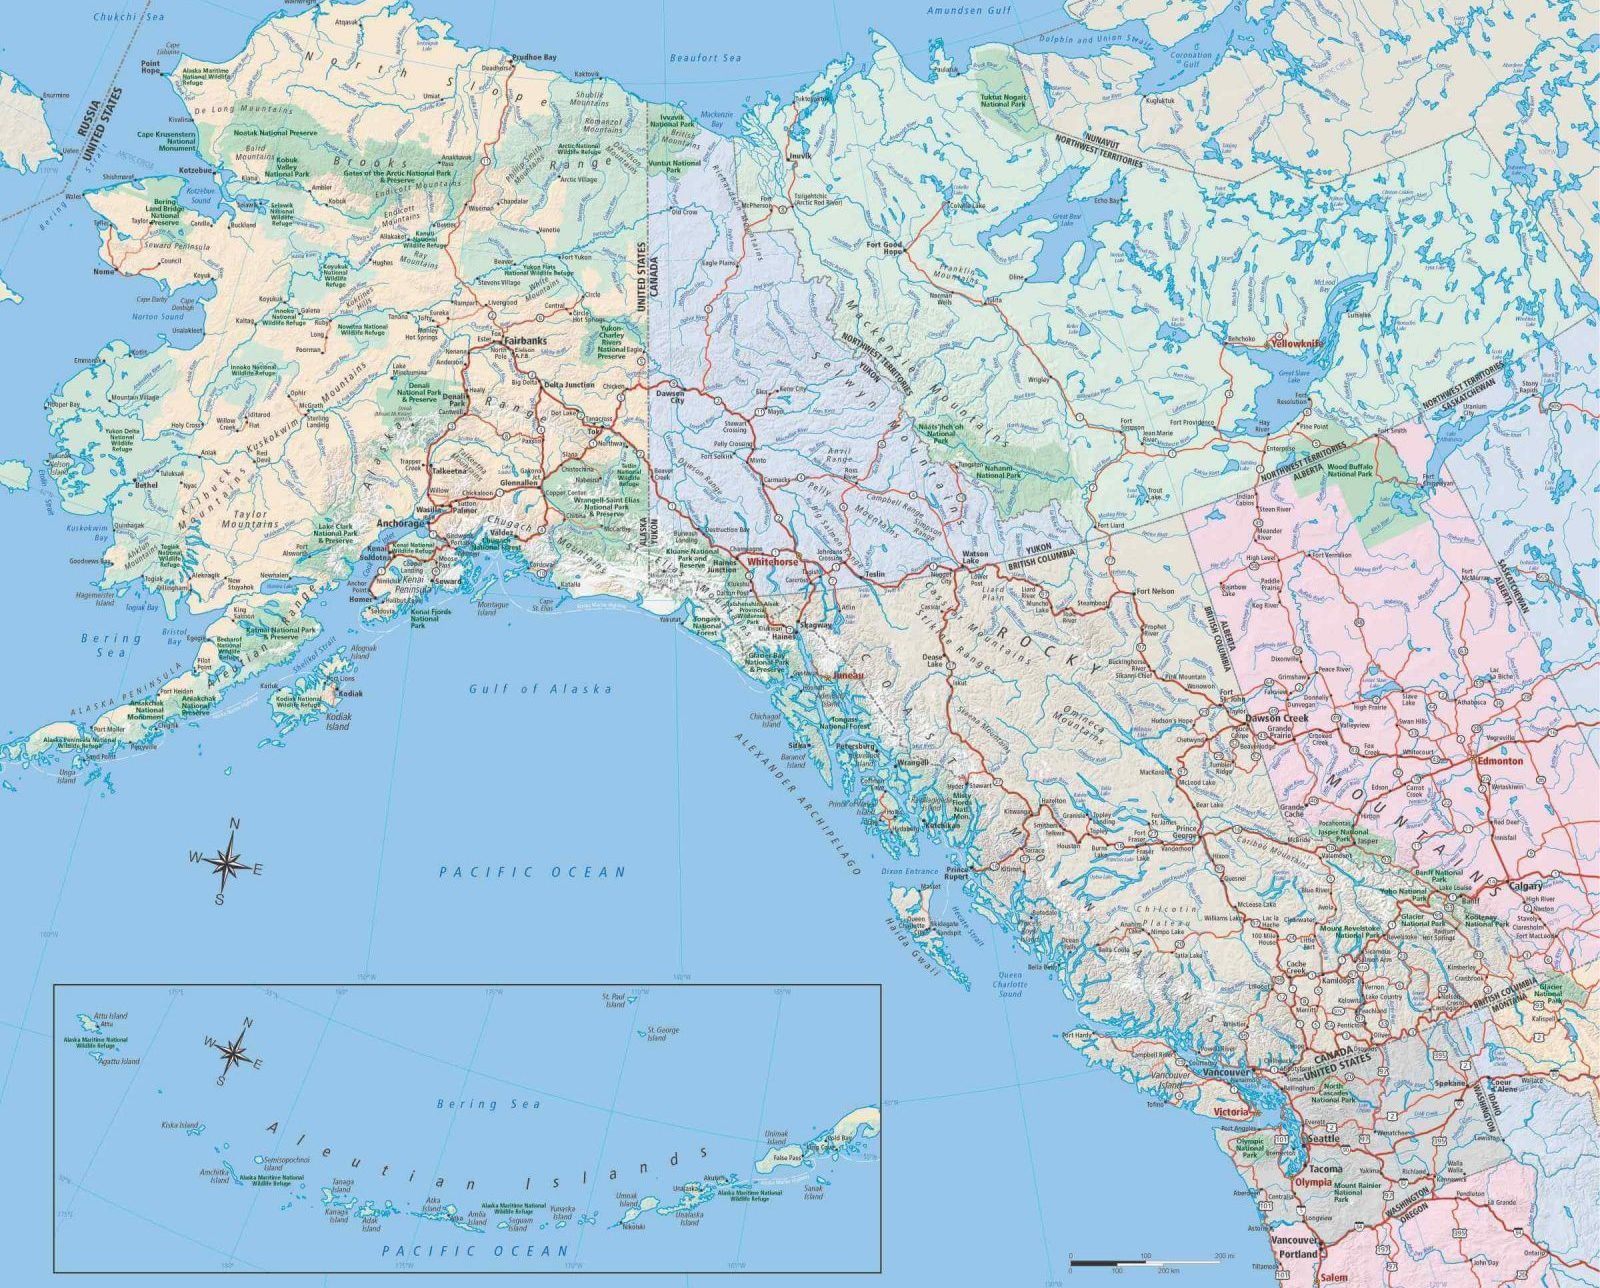 Map Of Alaska The Best Alaska Maps For Cities And Highways